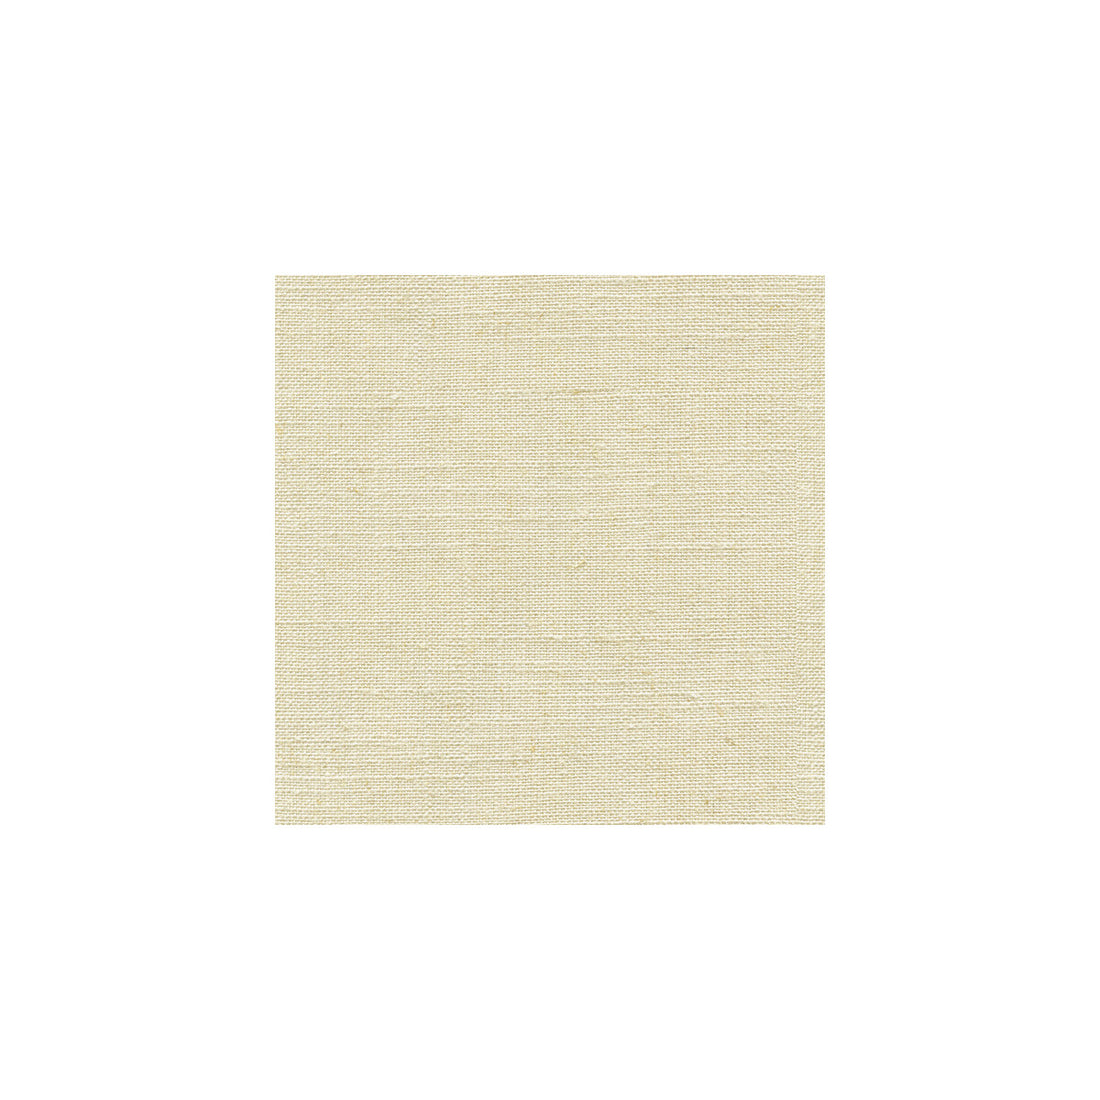 Mesmerizing fabric in ivory color - pattern 31502.1.0 - by Kravet Smart in the Gis collection